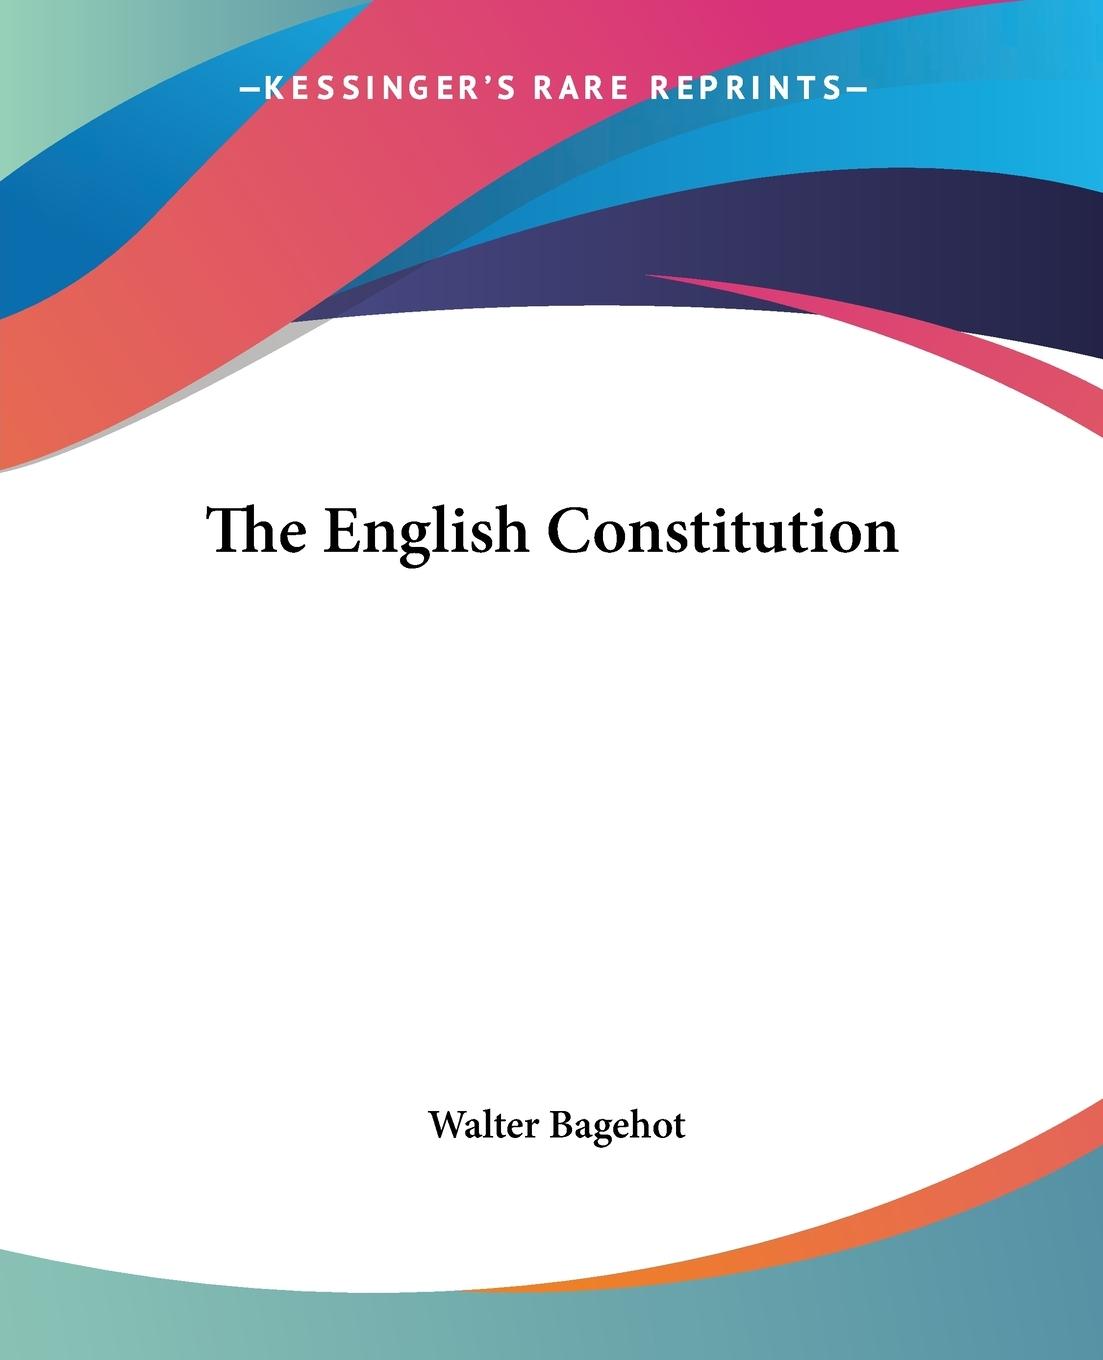 The English Constitution - Bagehot, Walter